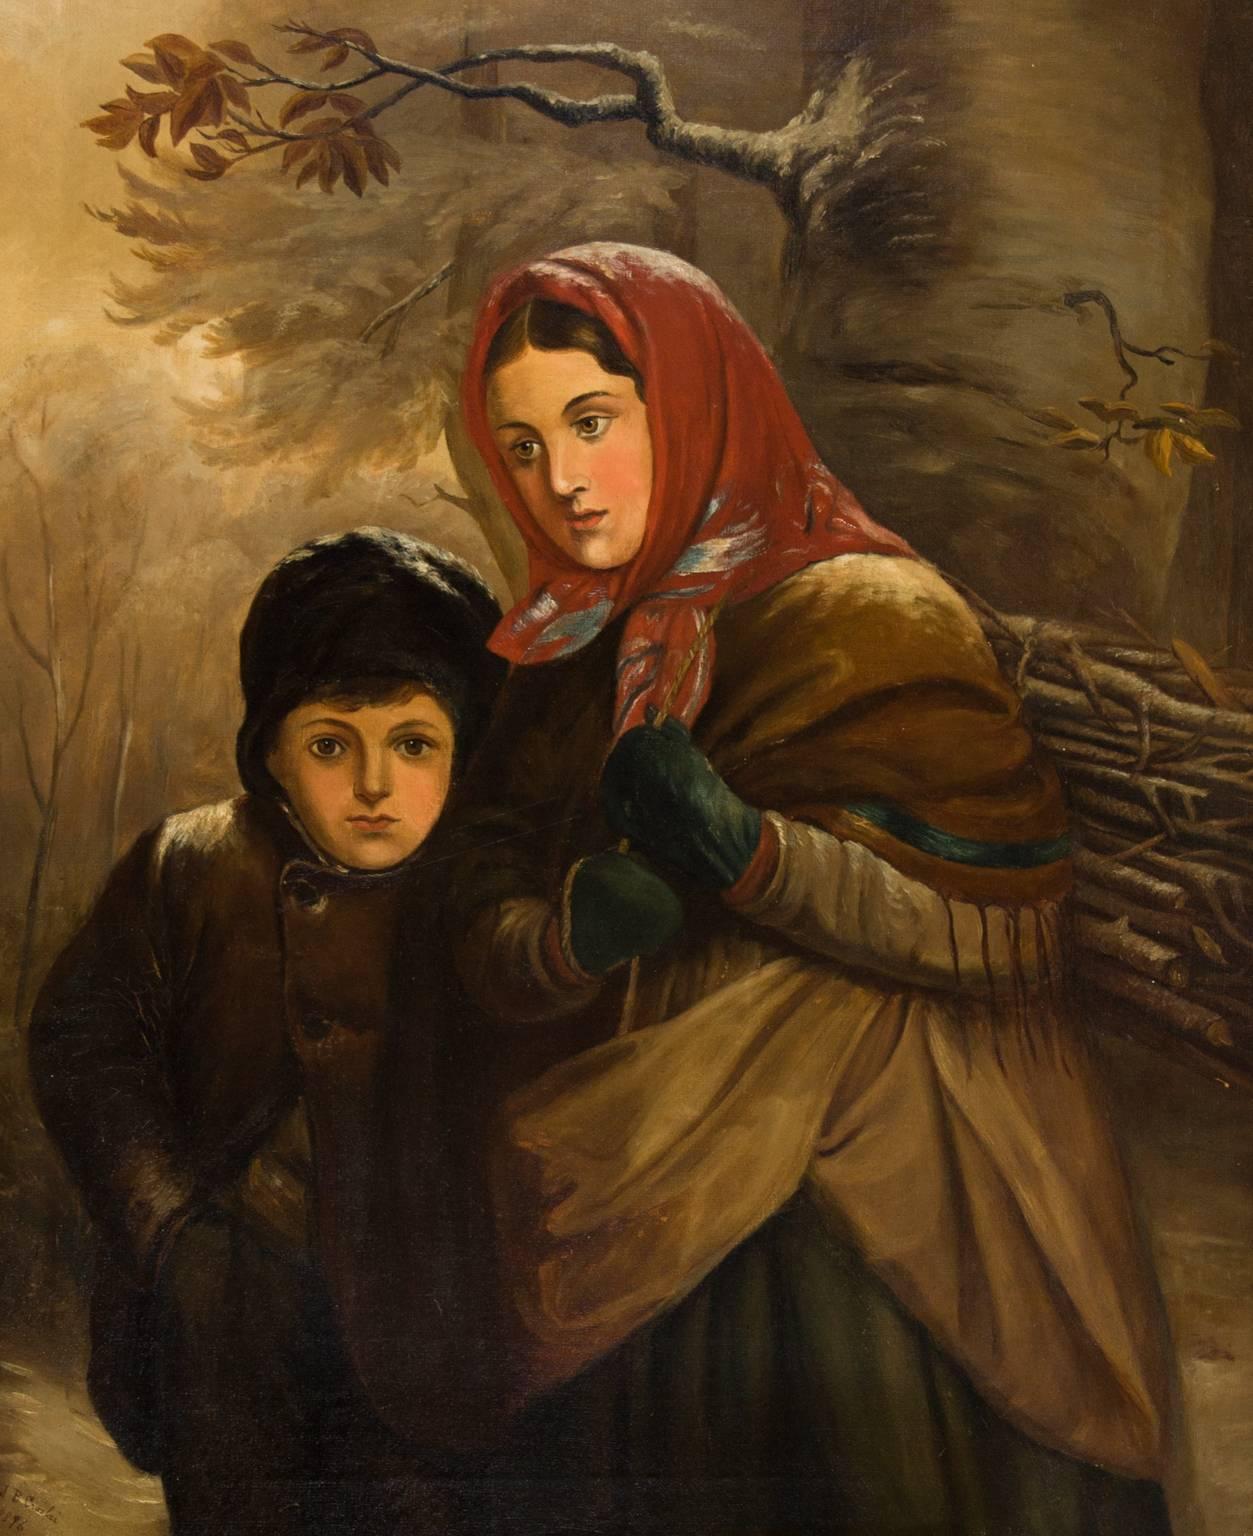 An exquisite late Victorian English School study of a young boy and girl huddled against the cold in a winter setting. Signed and dated 1896 by J. B. Crosbie to the lower left. Beautifully presented in a slightly later gilt frame with acanthus leaf